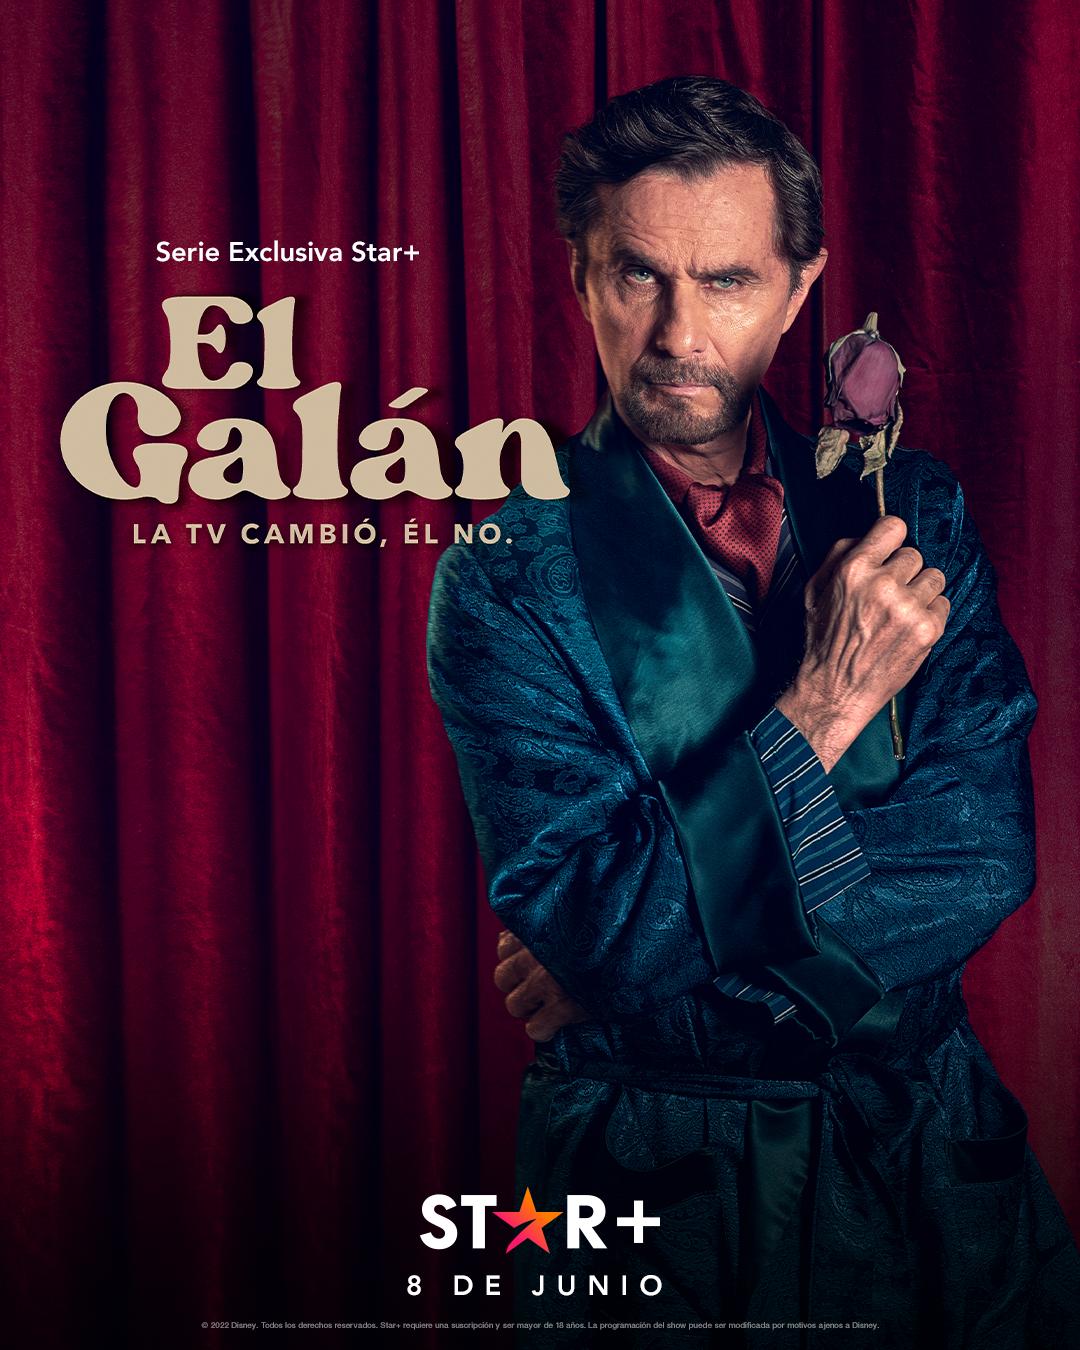 TV ratings for The Gallant. TV Changed, He Didn't (El Galán. La Tv Cambió, Él No) in Malaysia. Star+ TV series